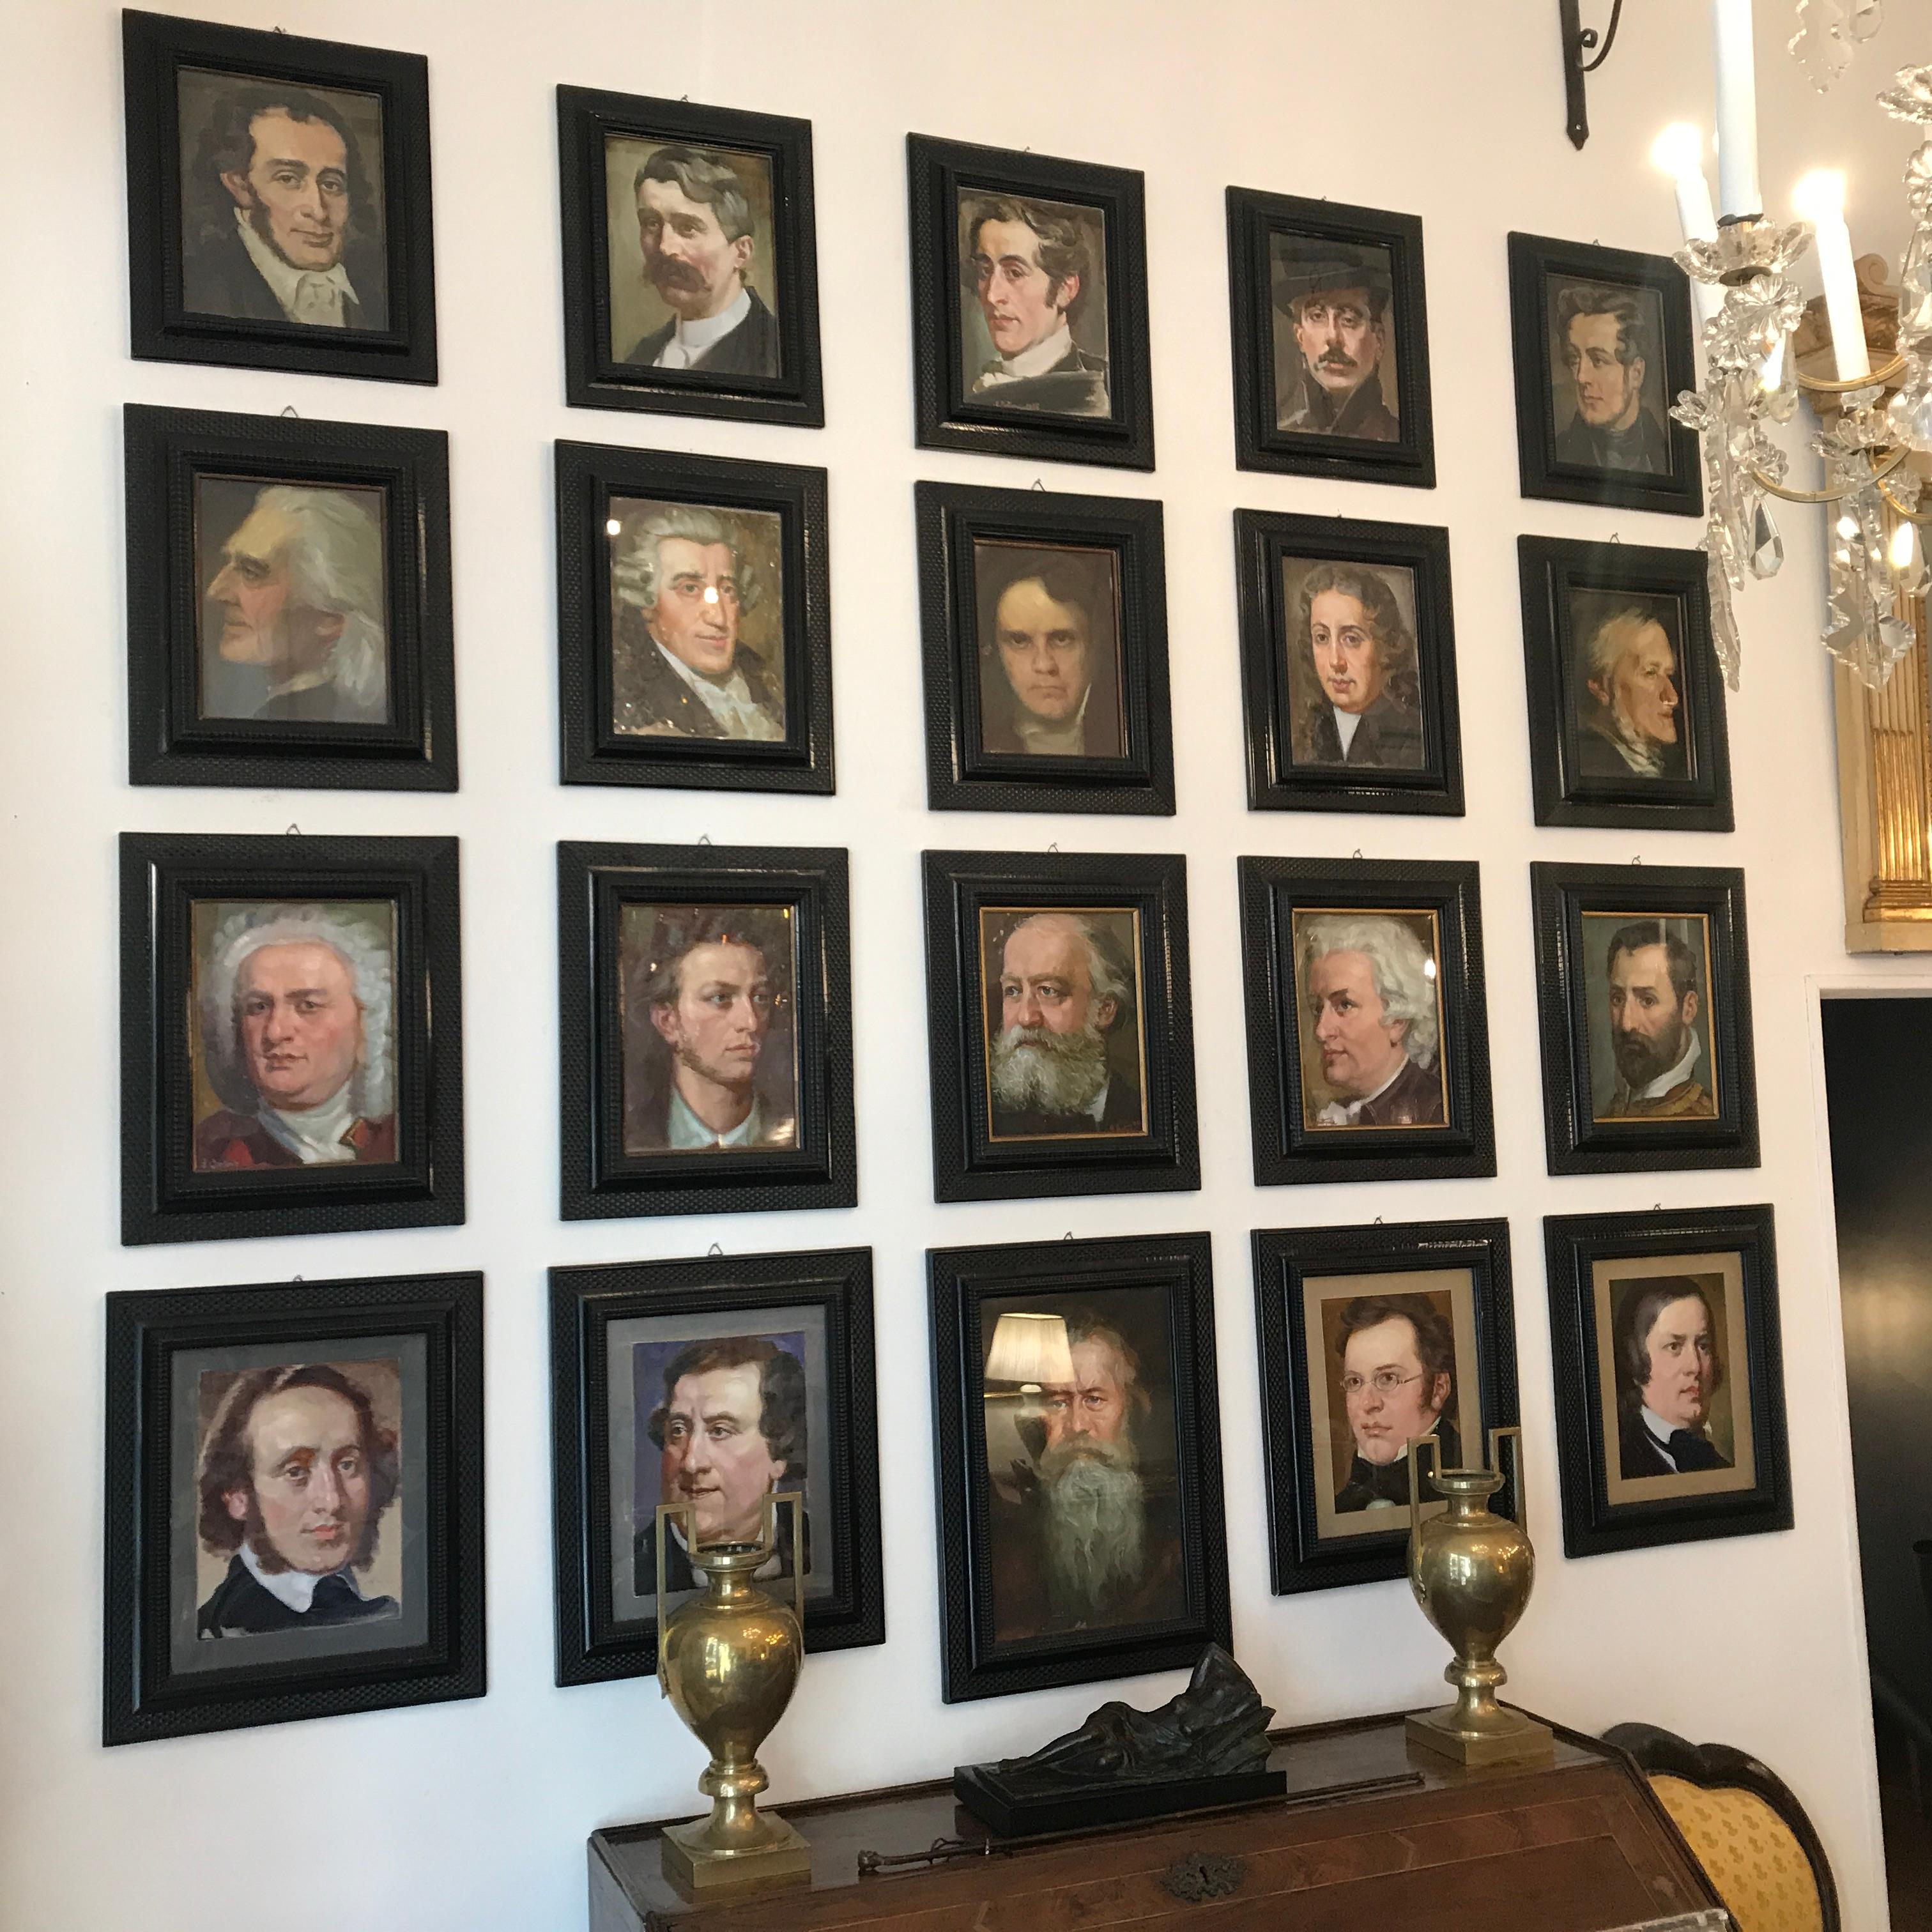 From Italy, a unique collection of 20 oil on canvas portraits paintings of the greatest European classical music composers, such as Bach, Brahms, Haydn, Gluck, Schumann, Schubert, Dvorak, Mendelssohn, Wagner, Monteverdi, Puccini, Rossini. This